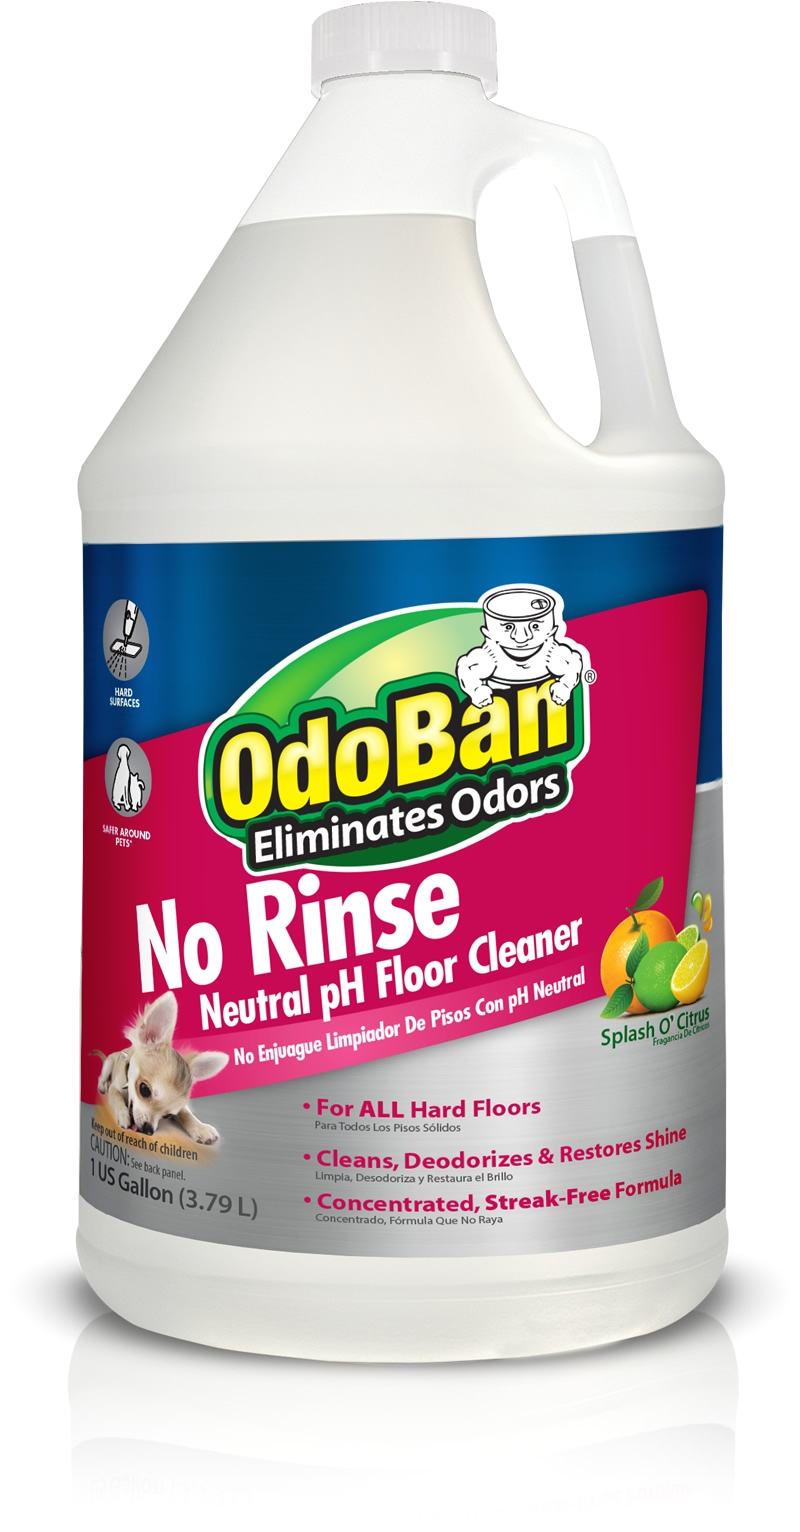 Is Zep Hardwood and Laminate Floor Cleaner Safe for Pets Odobana No Rinse Neutral Ph Floor Cleaner